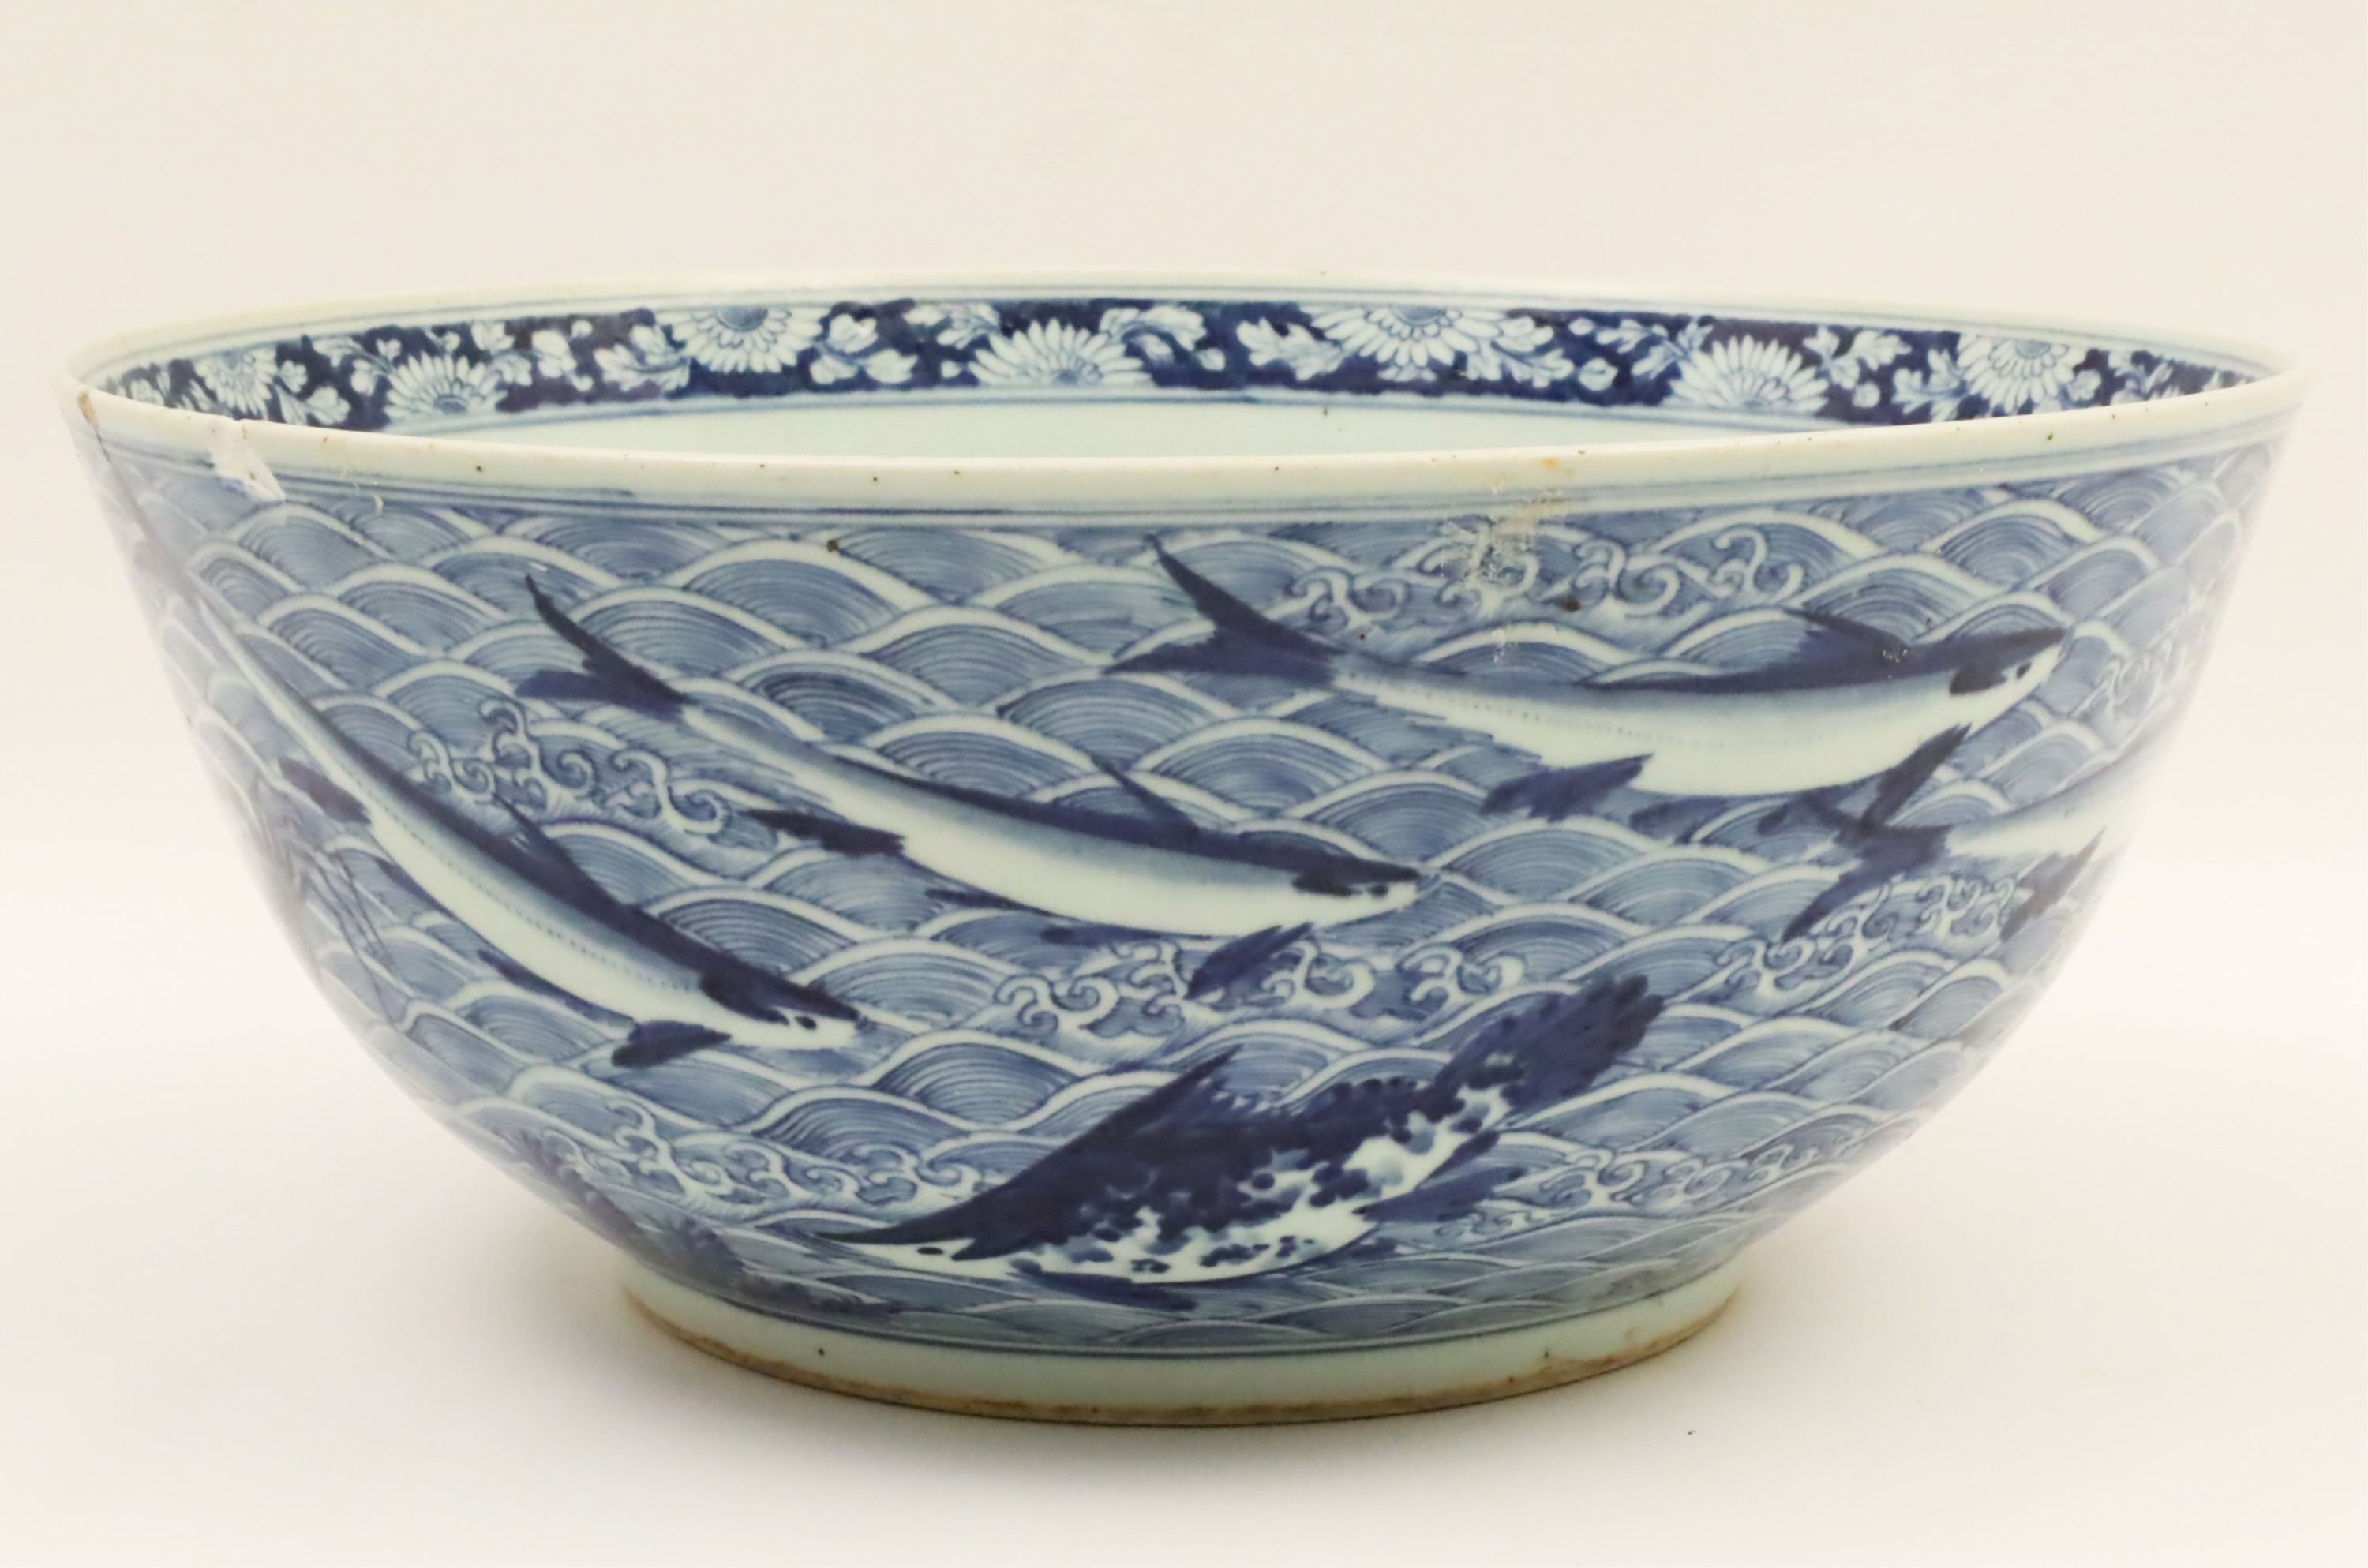 CHINESE EXPORT PUNCH BOWL Blue and white